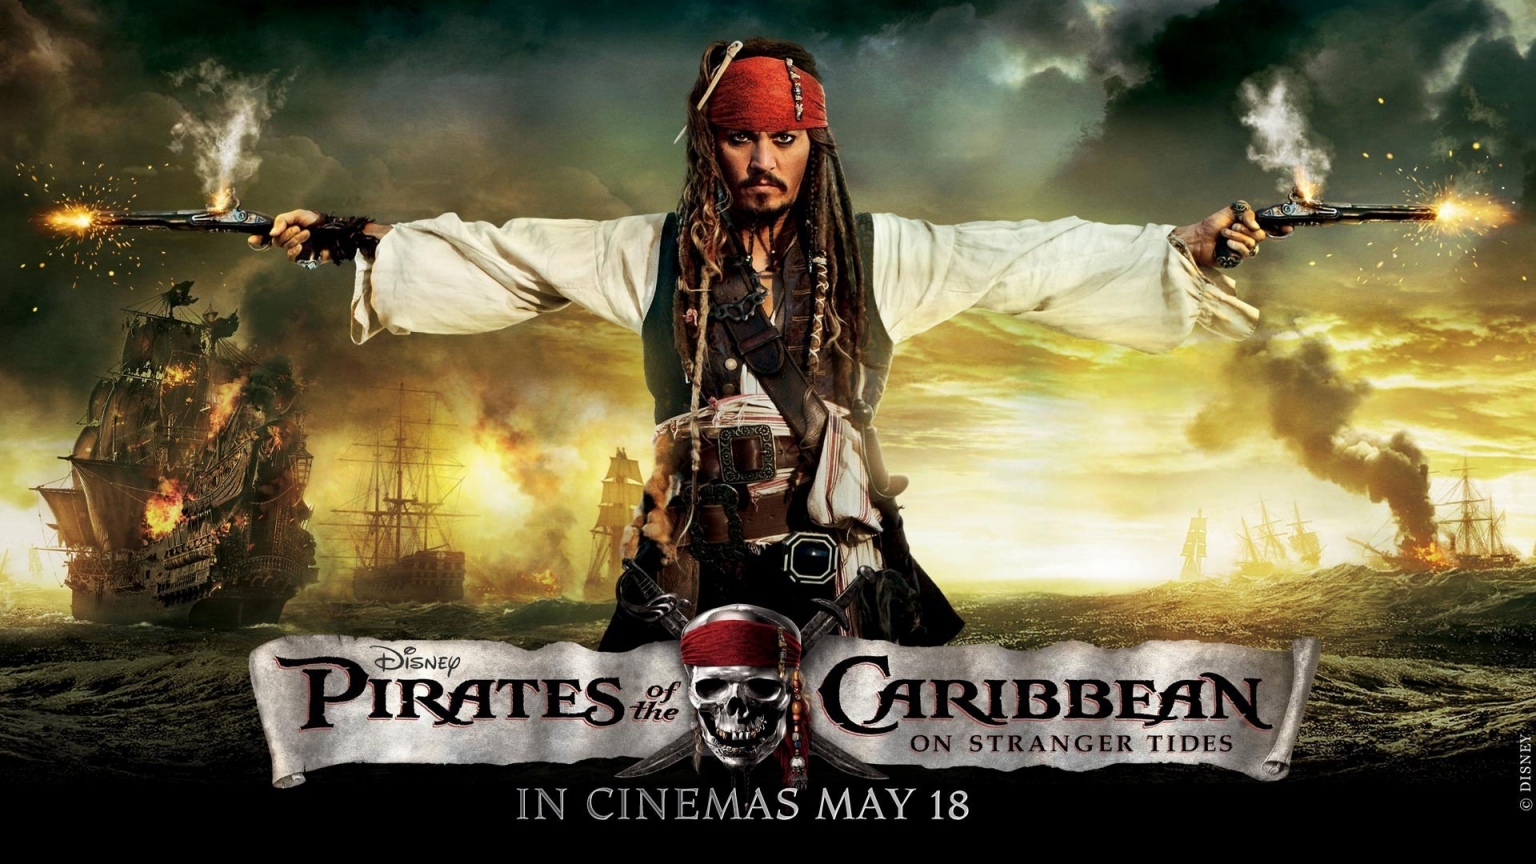 Pirates of the Caribbean 4 Poster for 1536 x 864 HDTV resolution